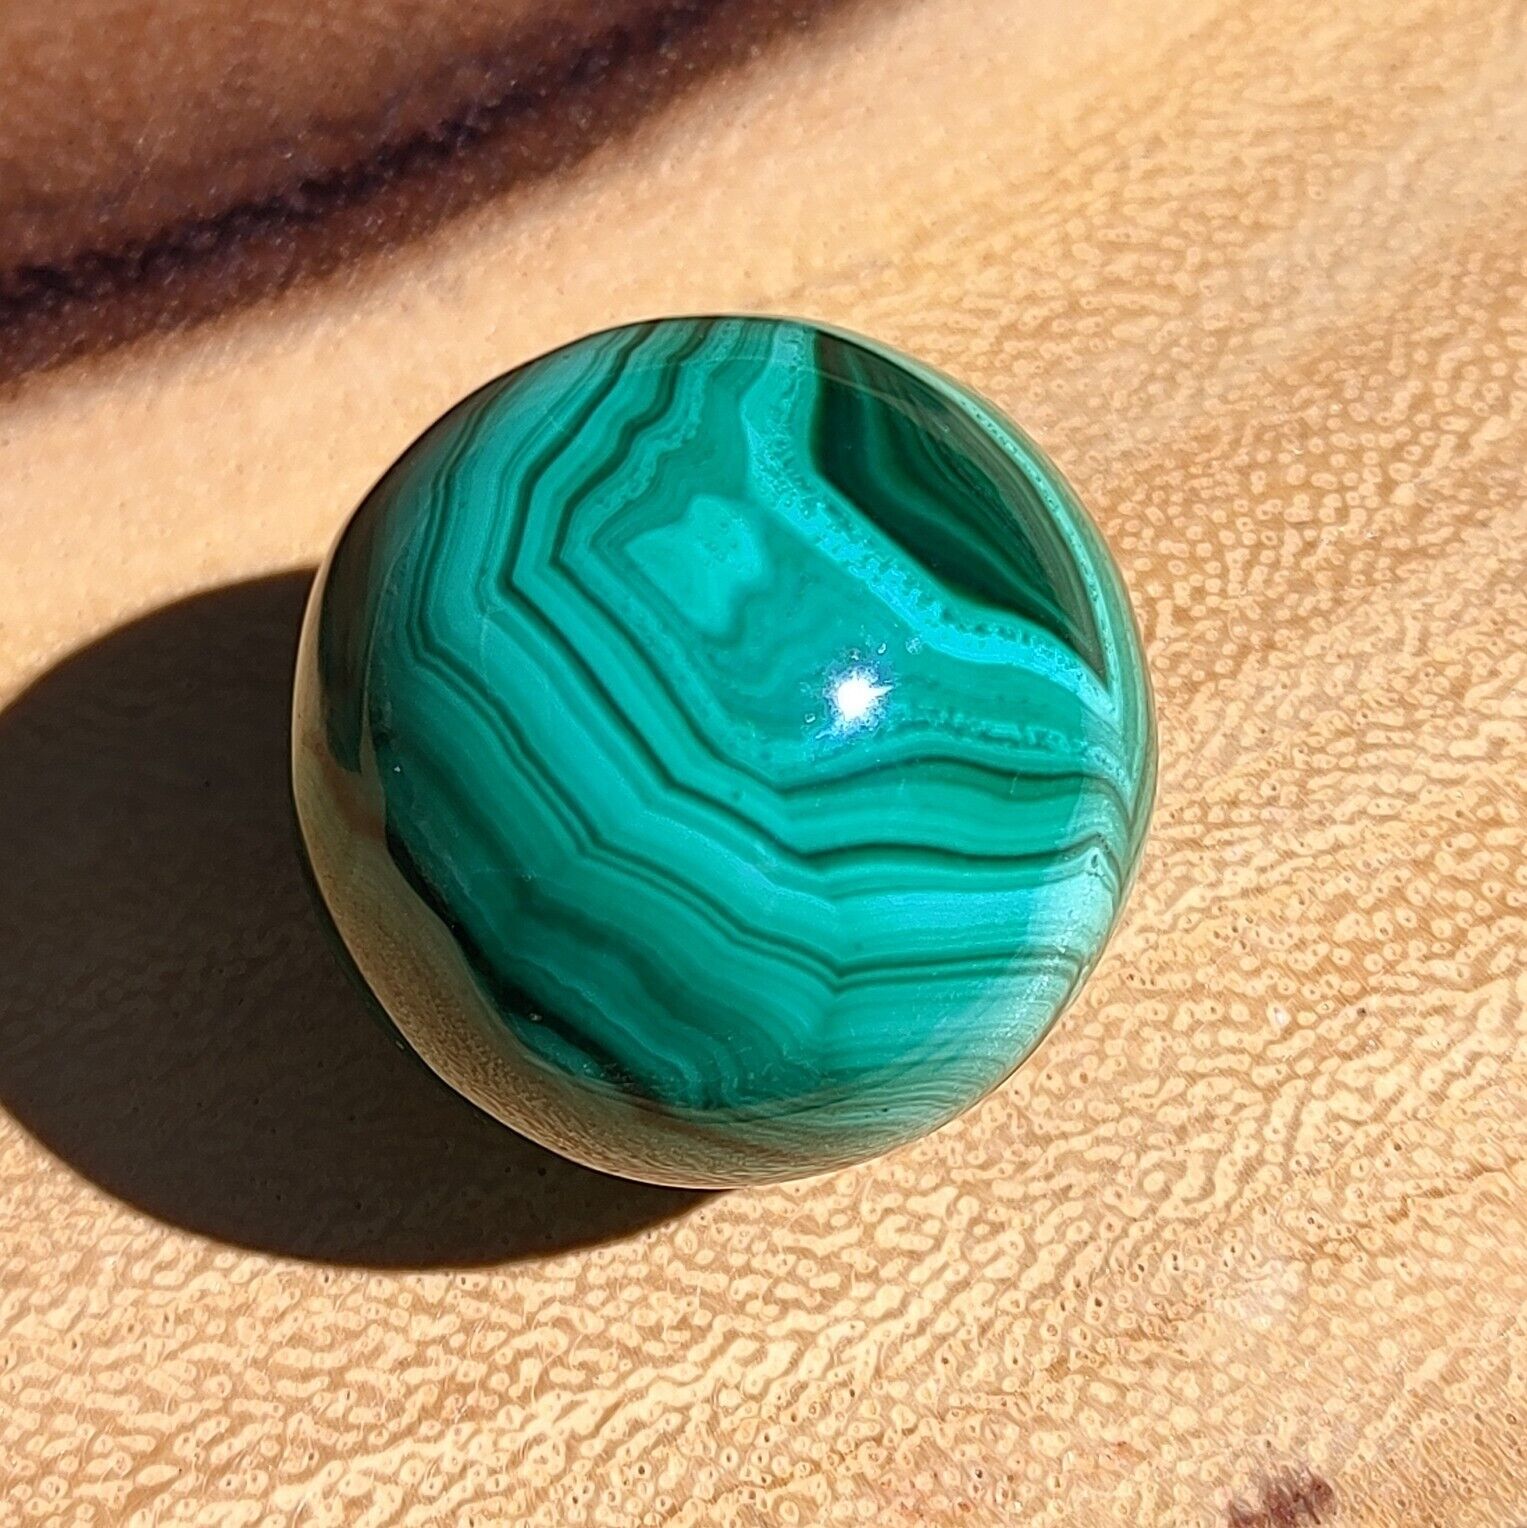 OUTSTANDING 24MM CONGO MALACHITE CRYSTAL SPHERE, DISPLAY MARBLE SPHERE 